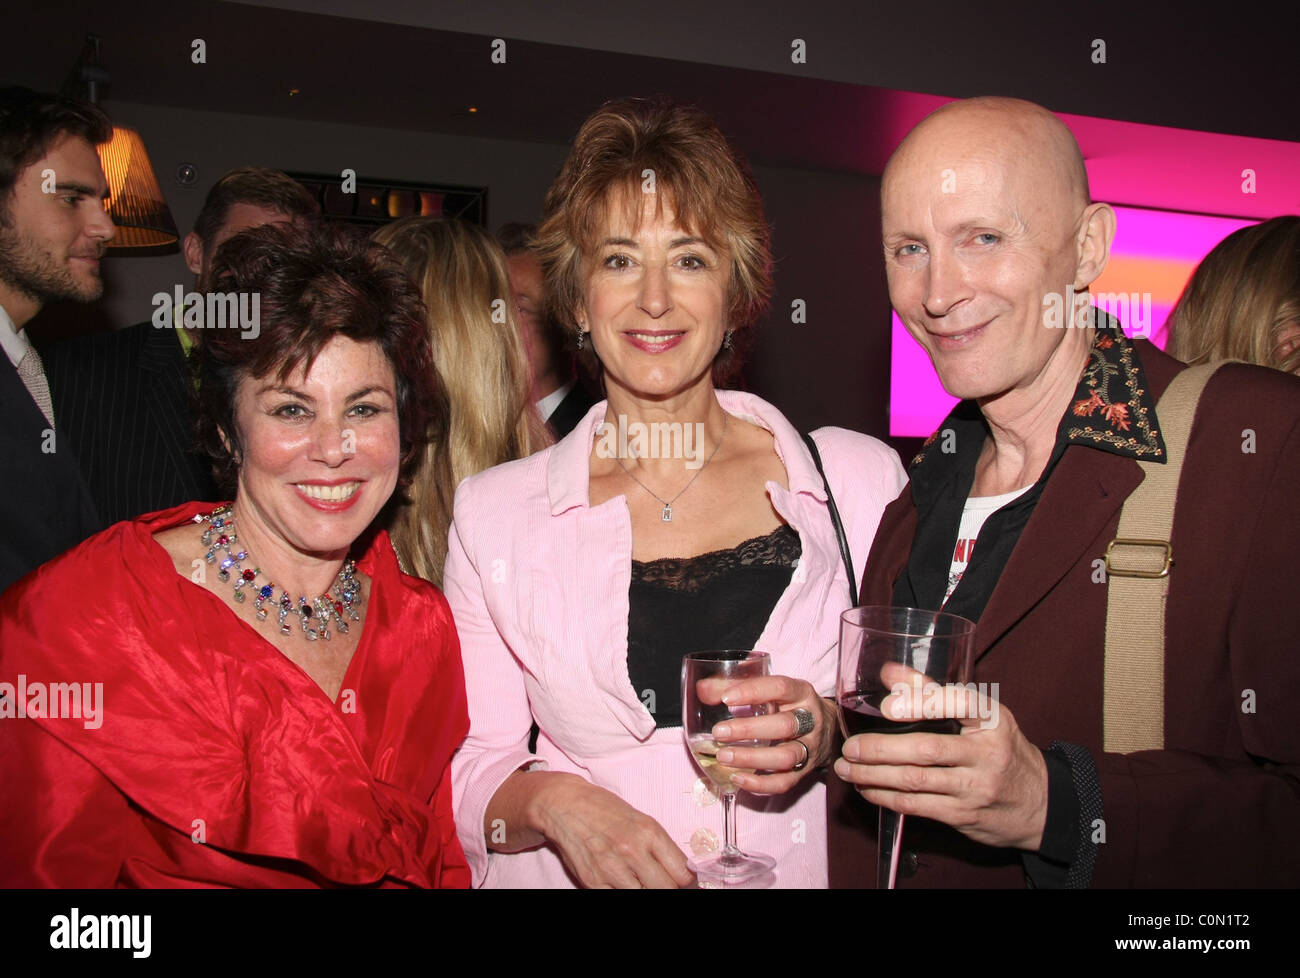 Ruby Wax, Maureen Lipman and Richard O'Brien attend the Kathy Lette Book Launch 'To Love Honour and Betray' held at the Stock Photo